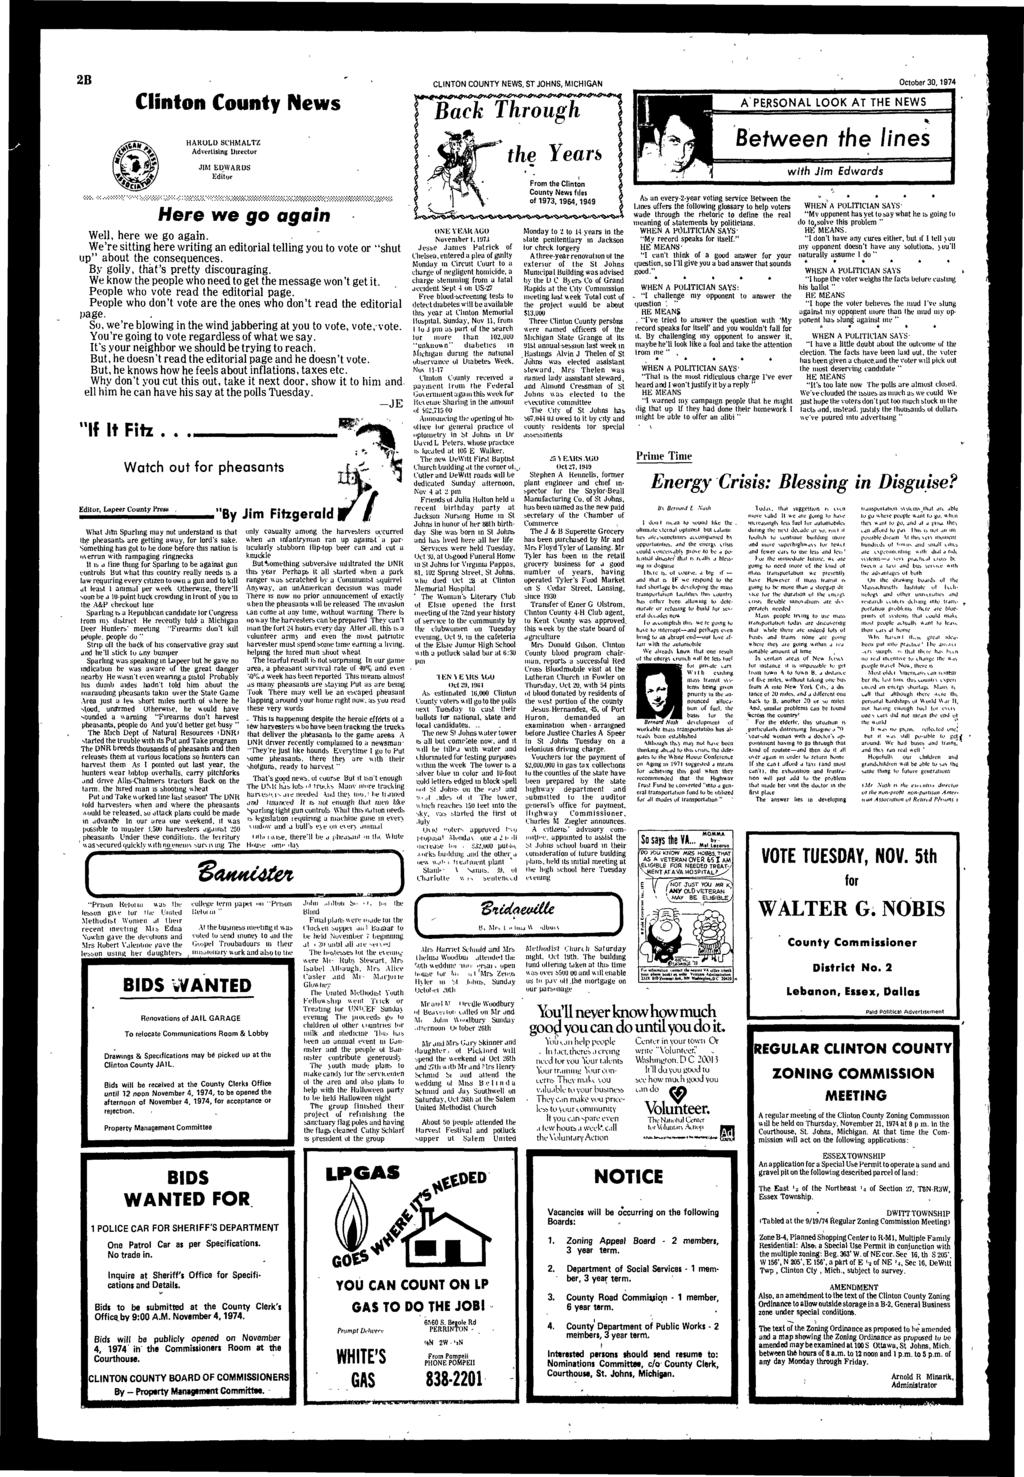 2B Clinton County News HAROL SCHMALTZ Advertising irector JIM EWARS Editor CLINTON COUNTY NEWS, ST JOHNS, MICHIGAN October 30,1974 A PERSONAL LOOK AT THE NEWS ji Between the lines with Jim Edwrds